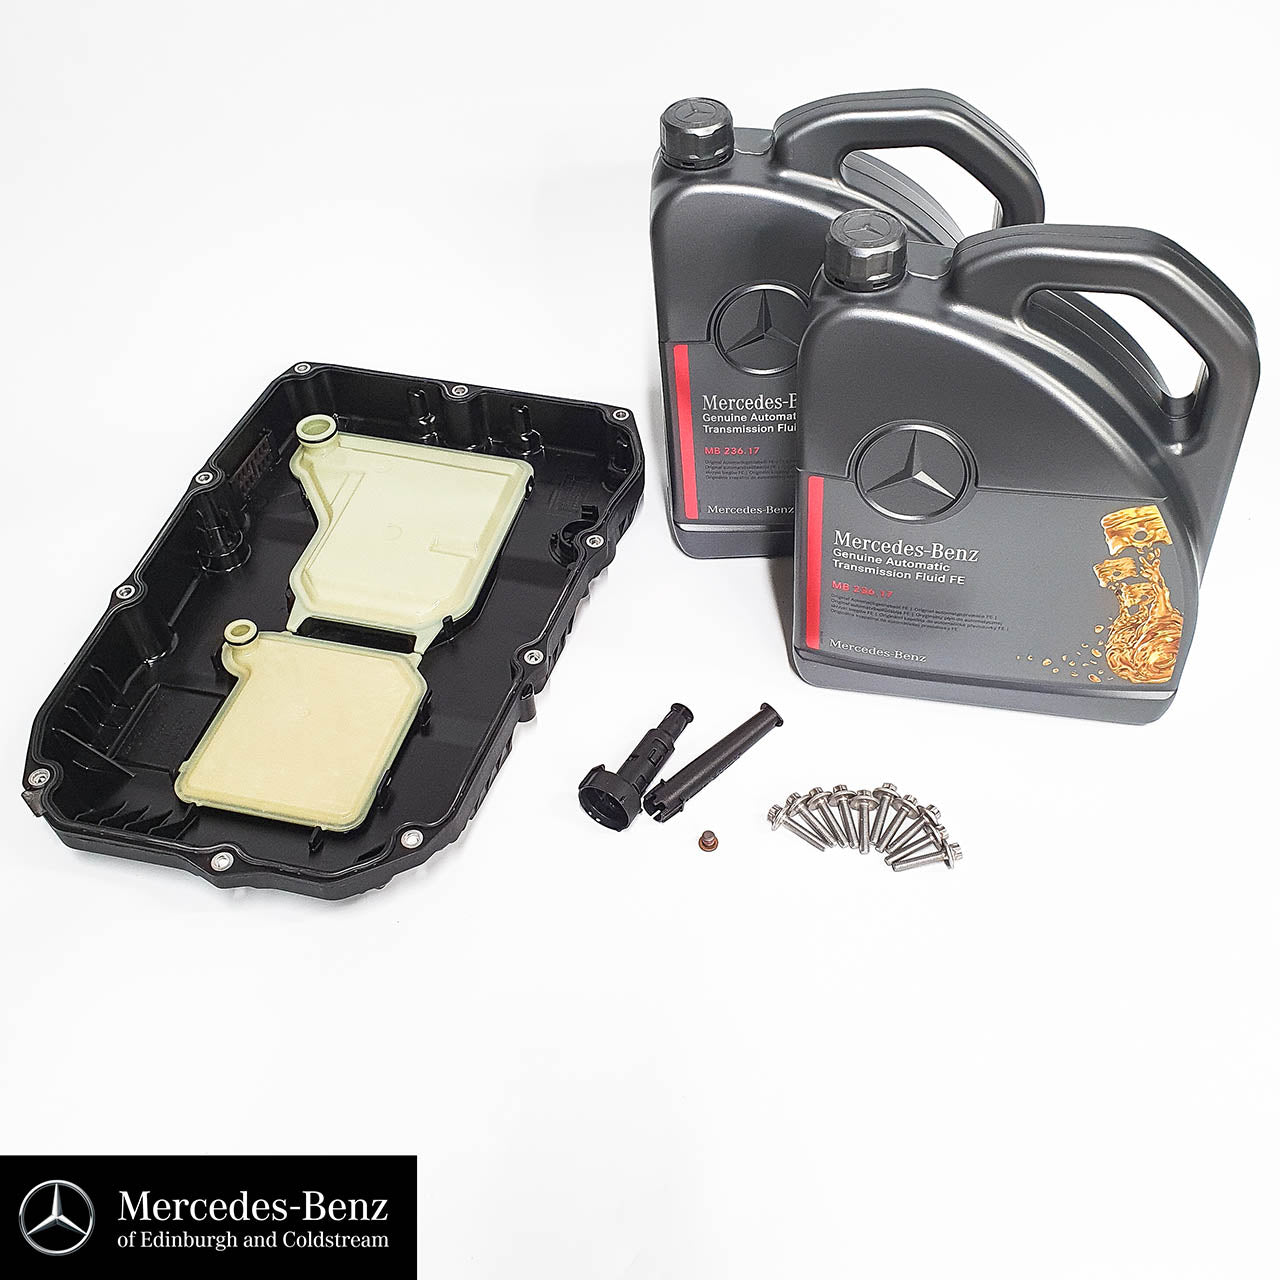 Genuine Mercedes-Benz 725.0 Automatic gearbox service kit